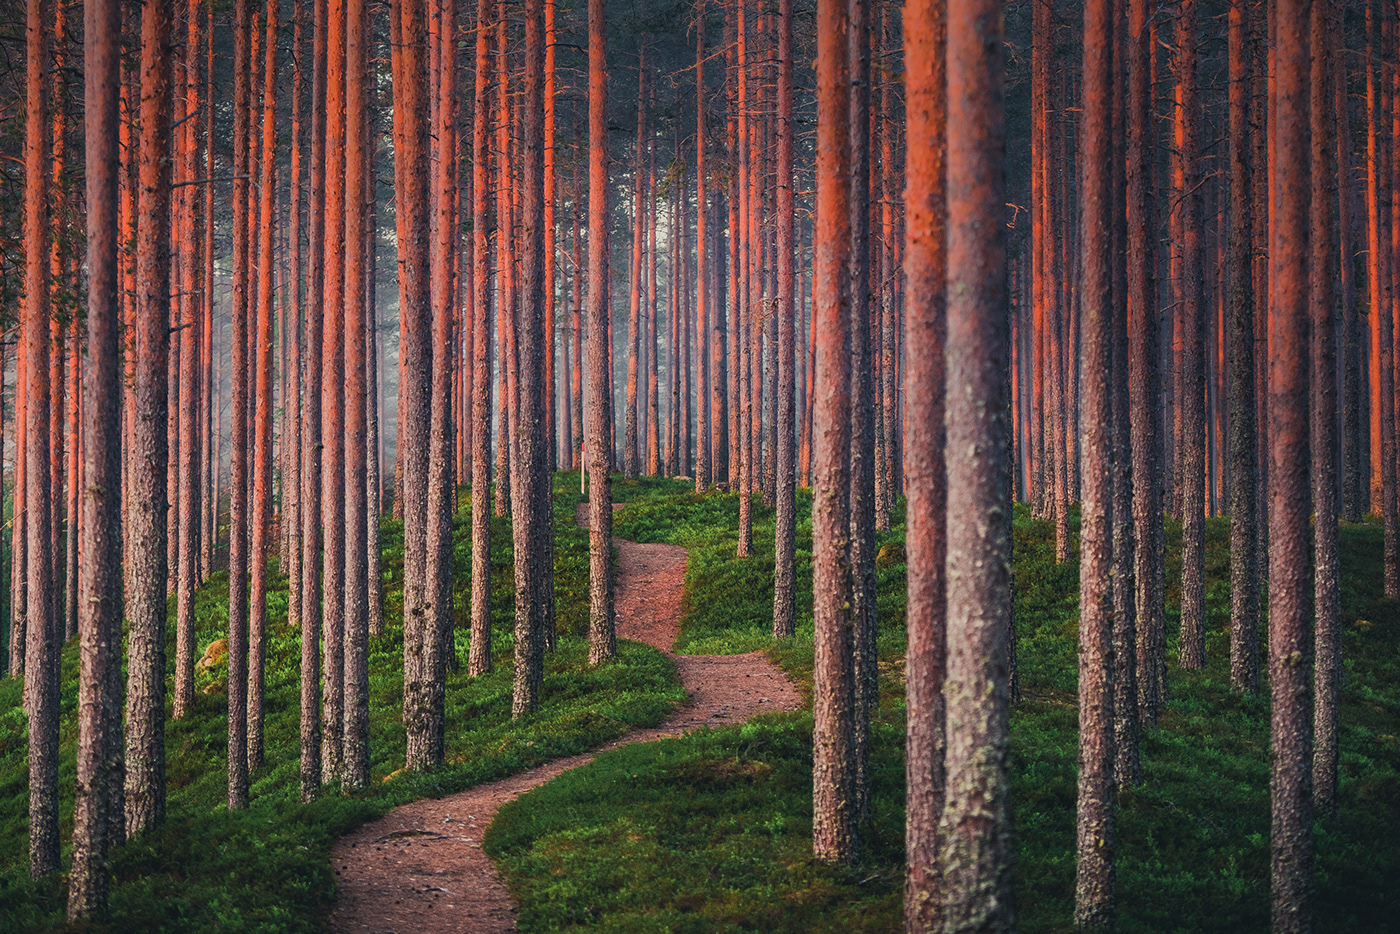 Pathway leading through a forest